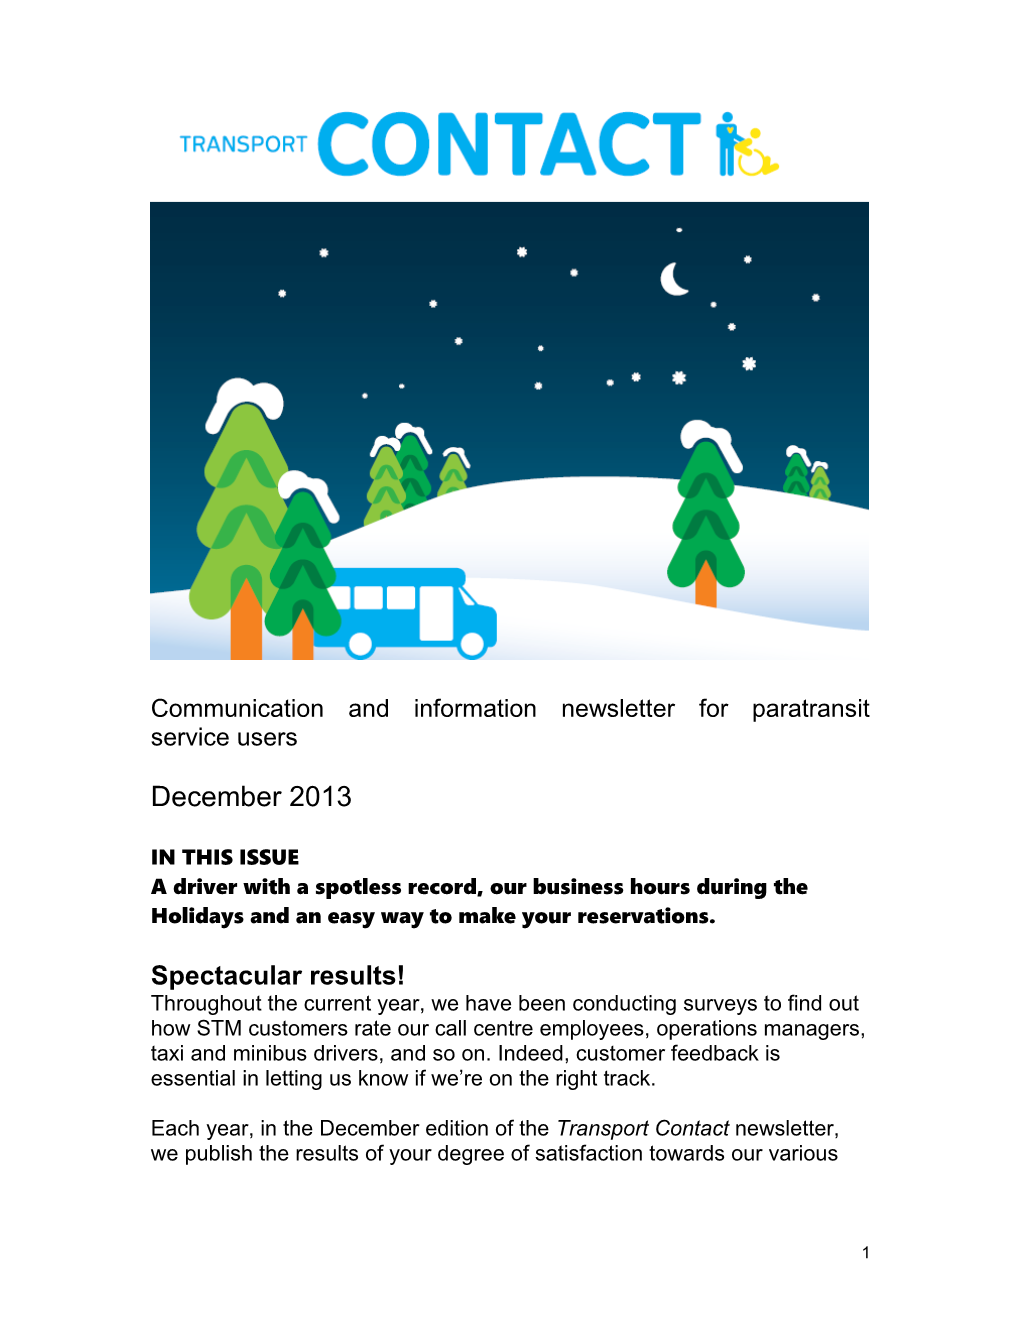 Communication and Information Newsletter for Paratransit Service Users